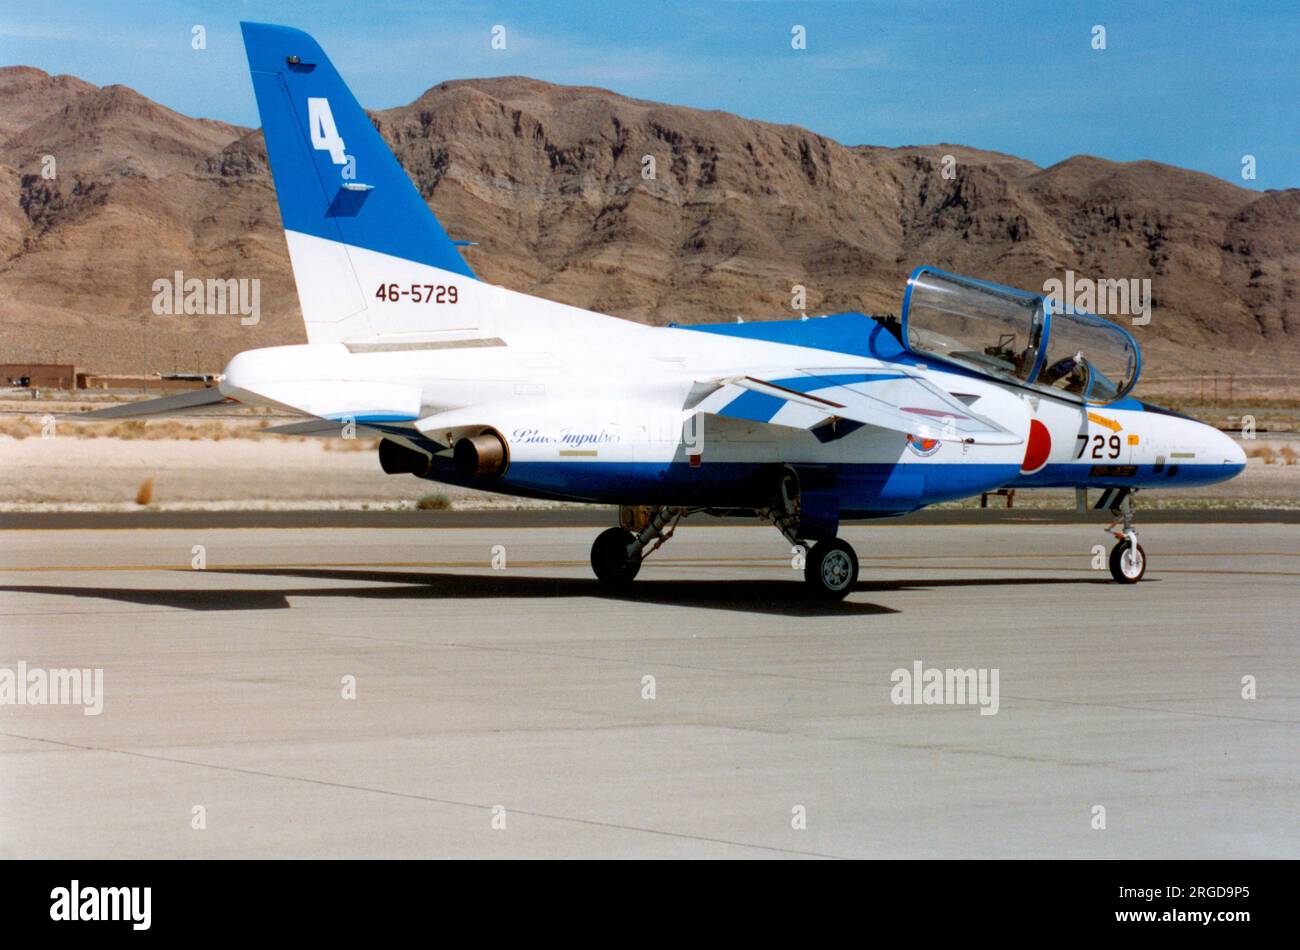 Japan Air Self Defence Force - Kawasaki T-4 46-5729 / number 4 (msn 1129), of the Blue Impulse aerobatic display team, at the Nellis Air Force Base '50th Anniversary of the USAF' airshow on 26 April 1997. Stock Photo